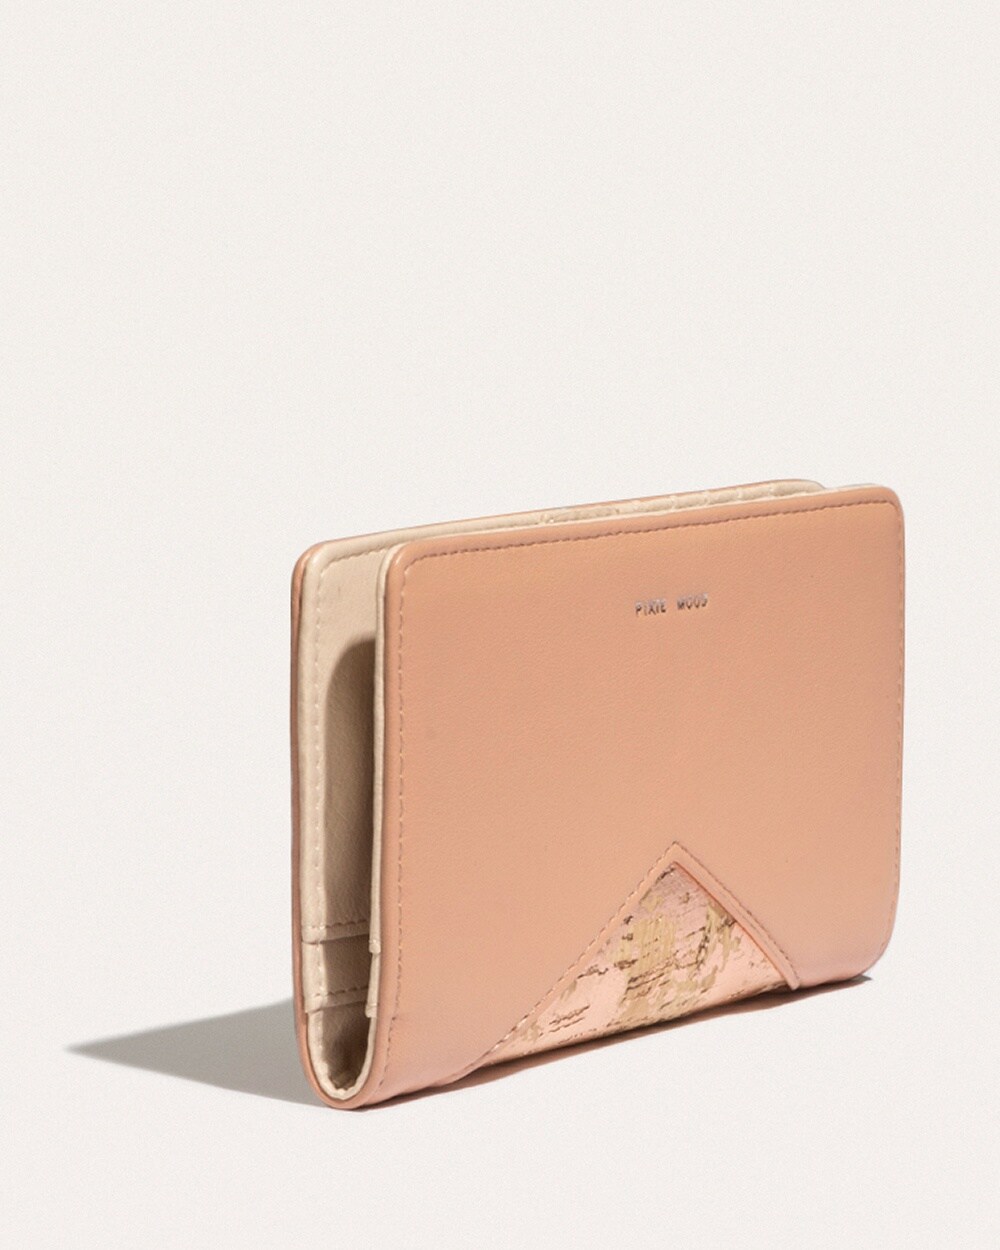 Pixie Mood Metallic Rose and Apricot-Hued Sophie Wallet